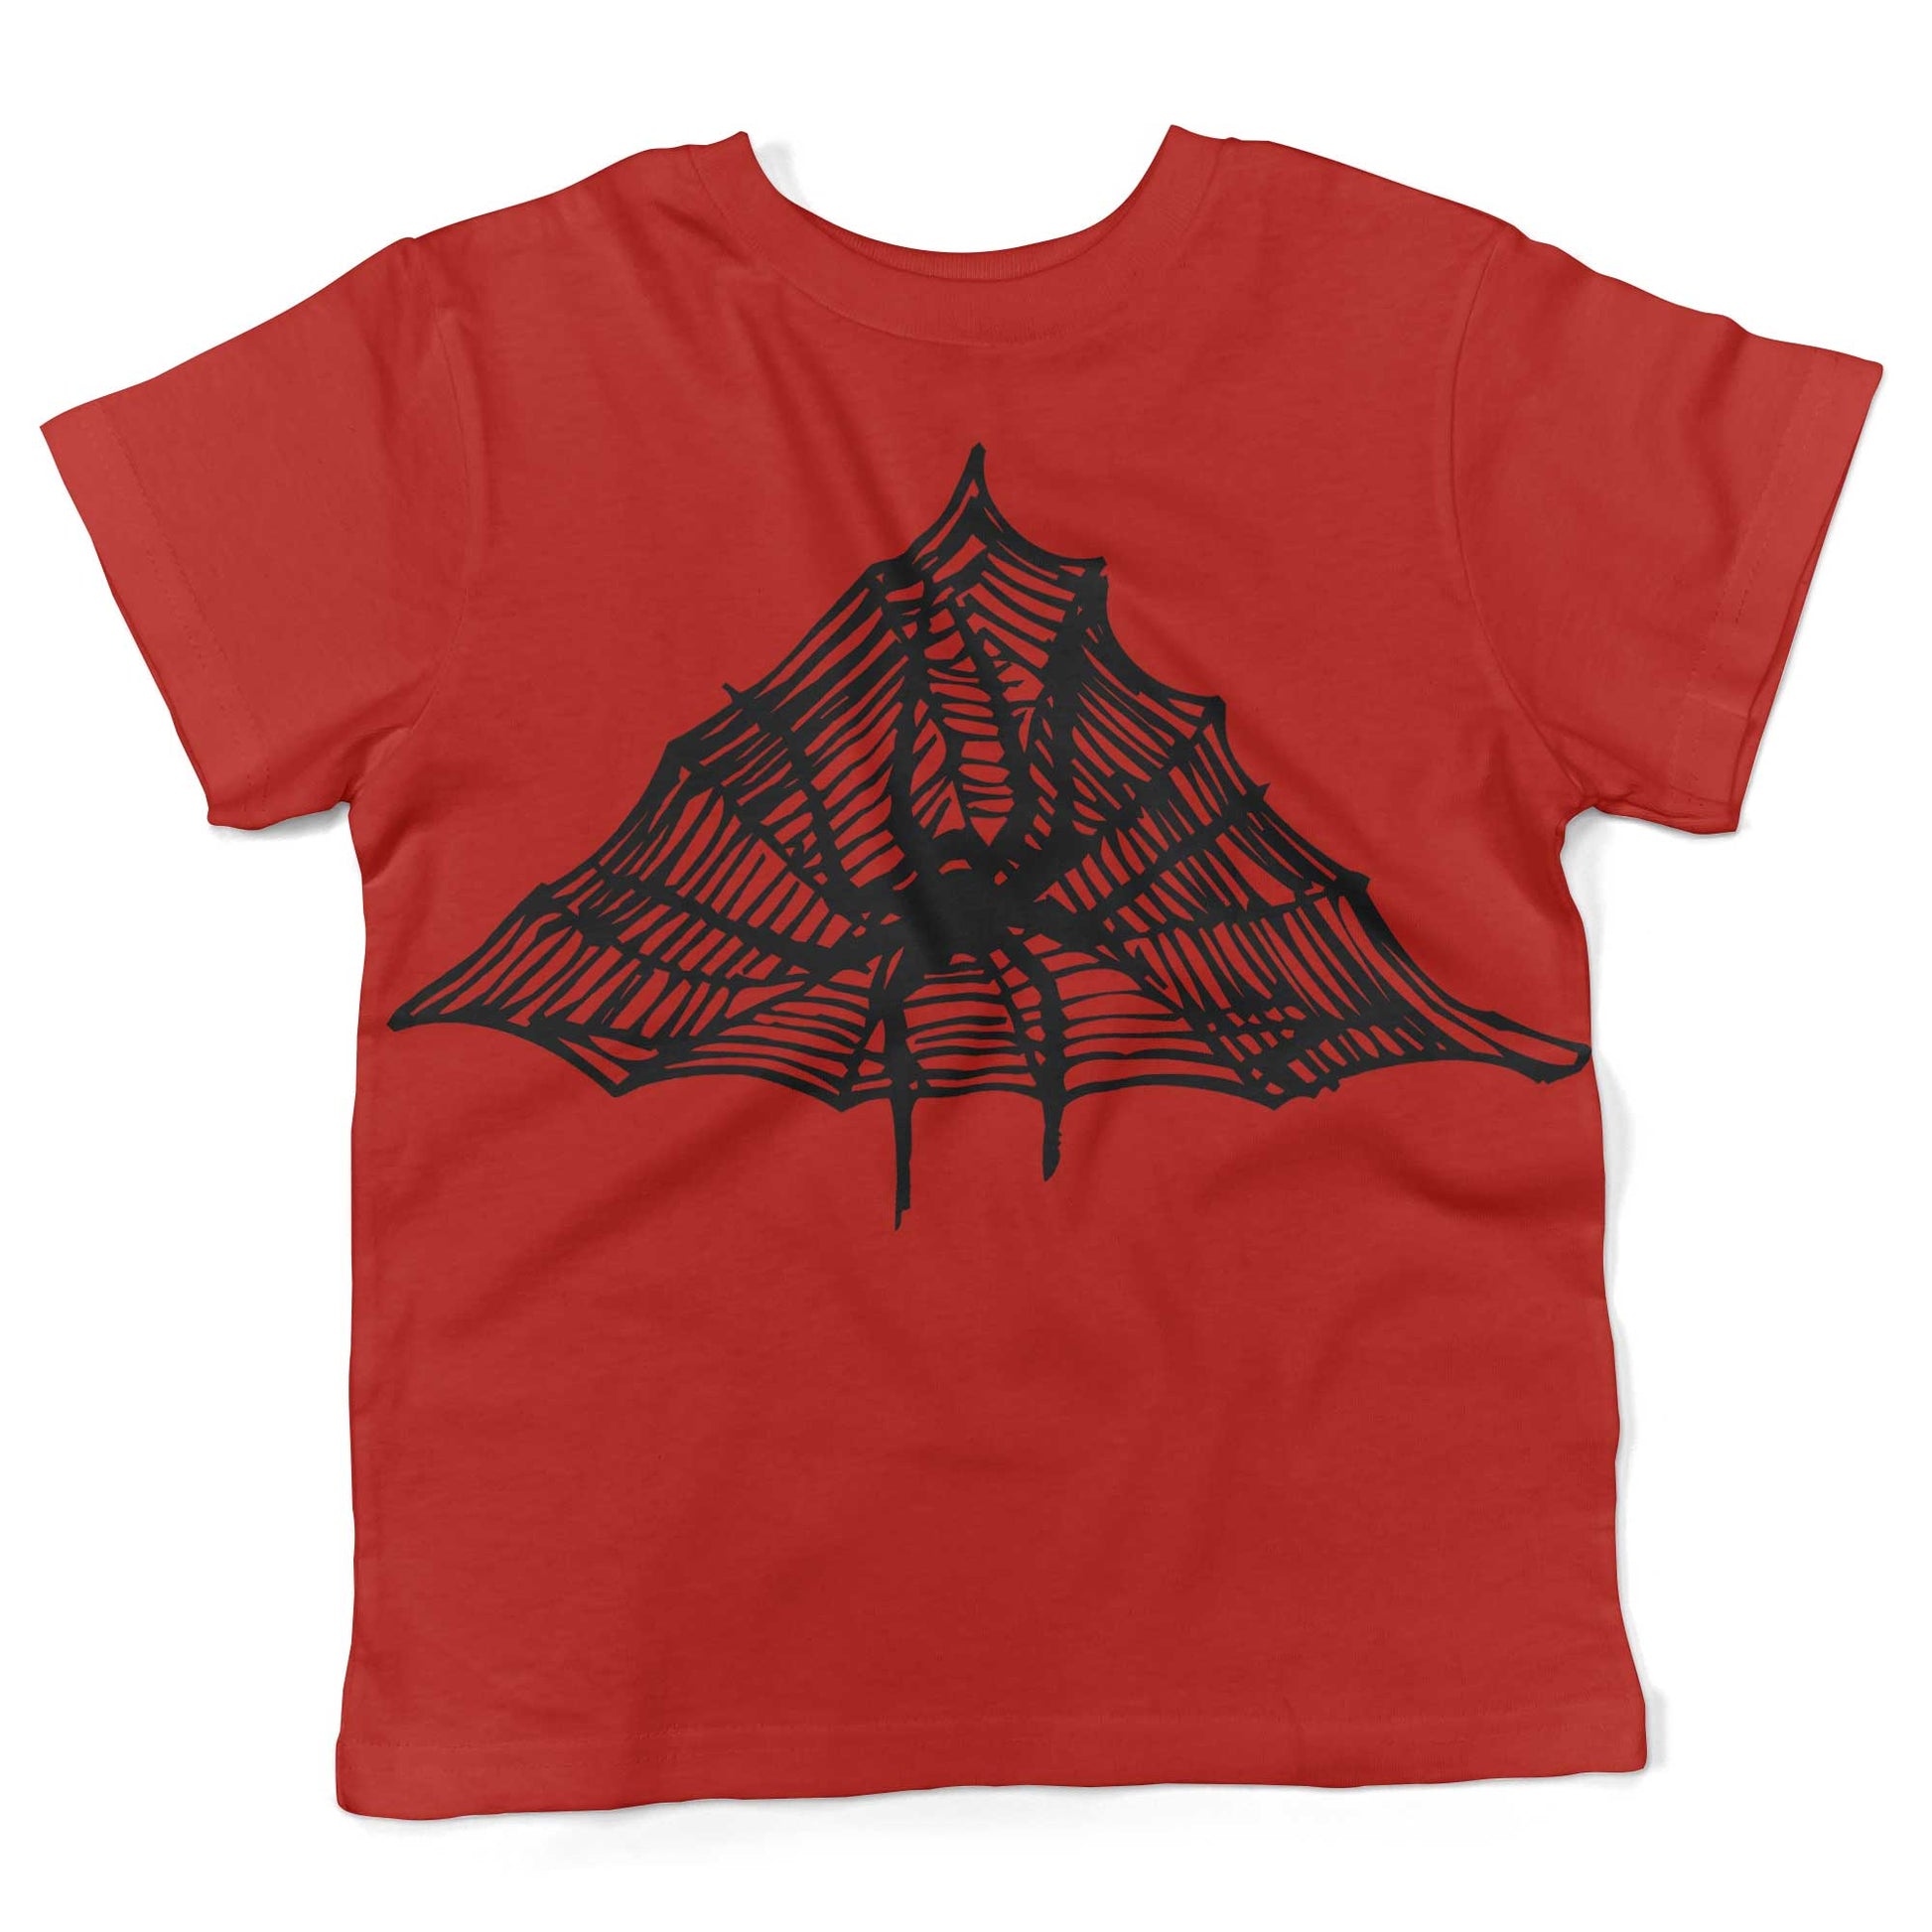 Spiderweb Toddler Shirt-Red-2T